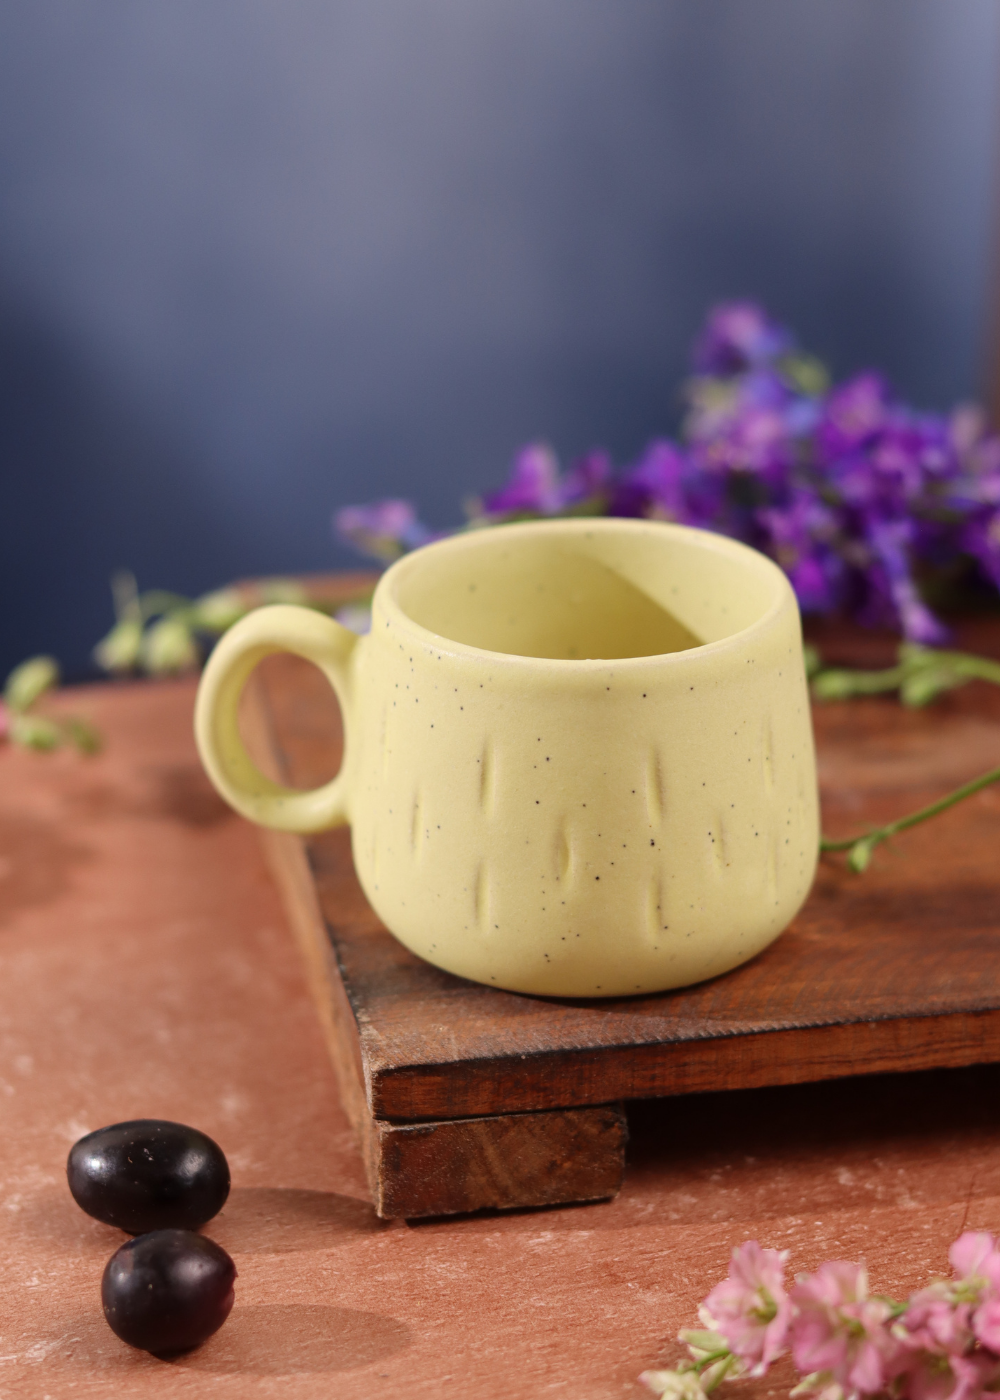 Mellow yellow chai cup on wooden surface